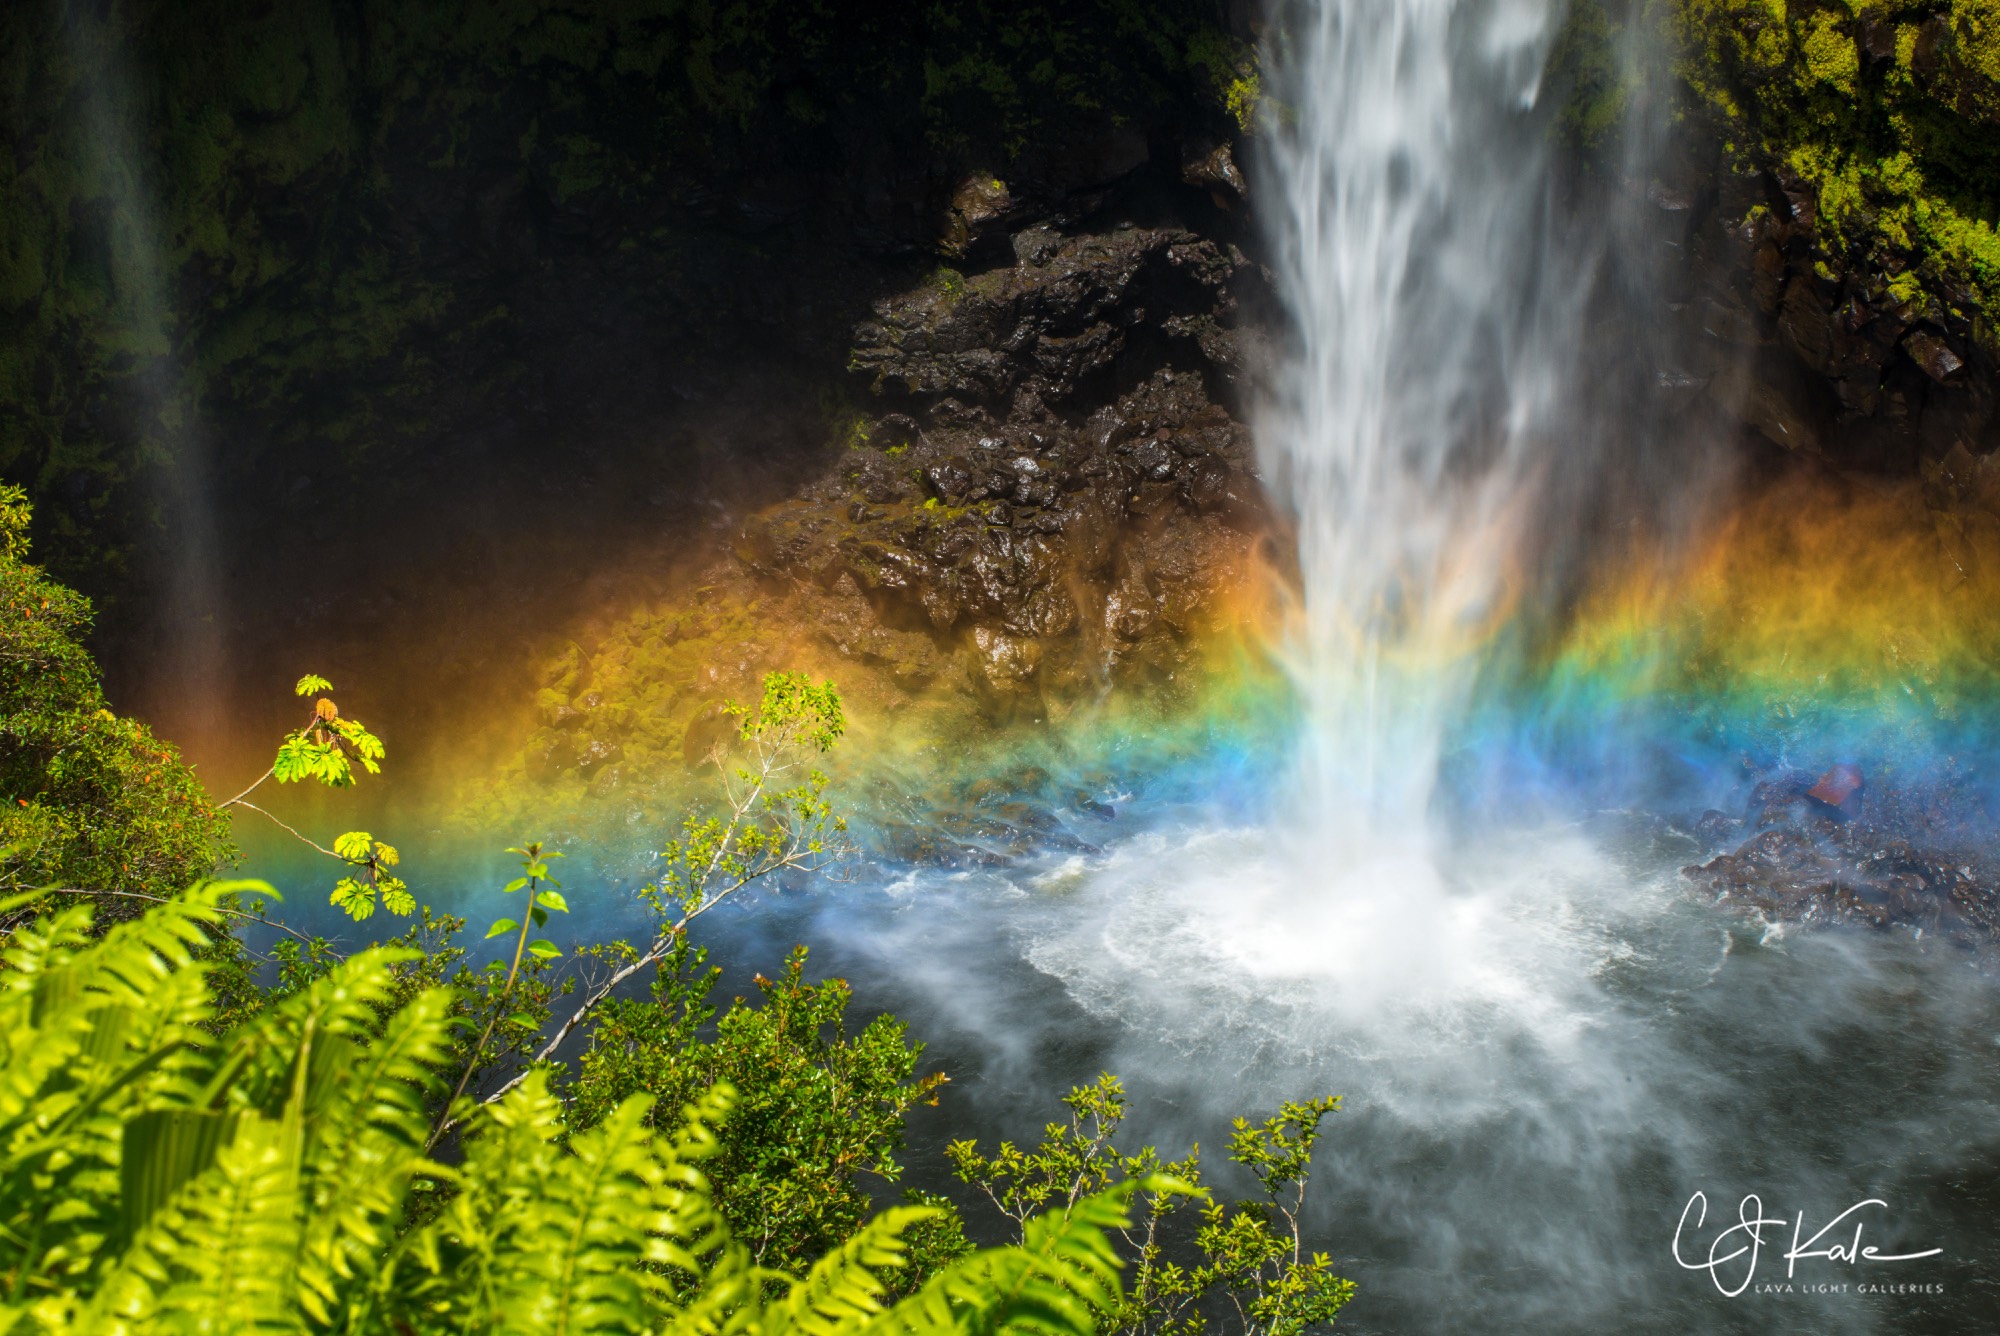 Rainbow caused by a waterfall.